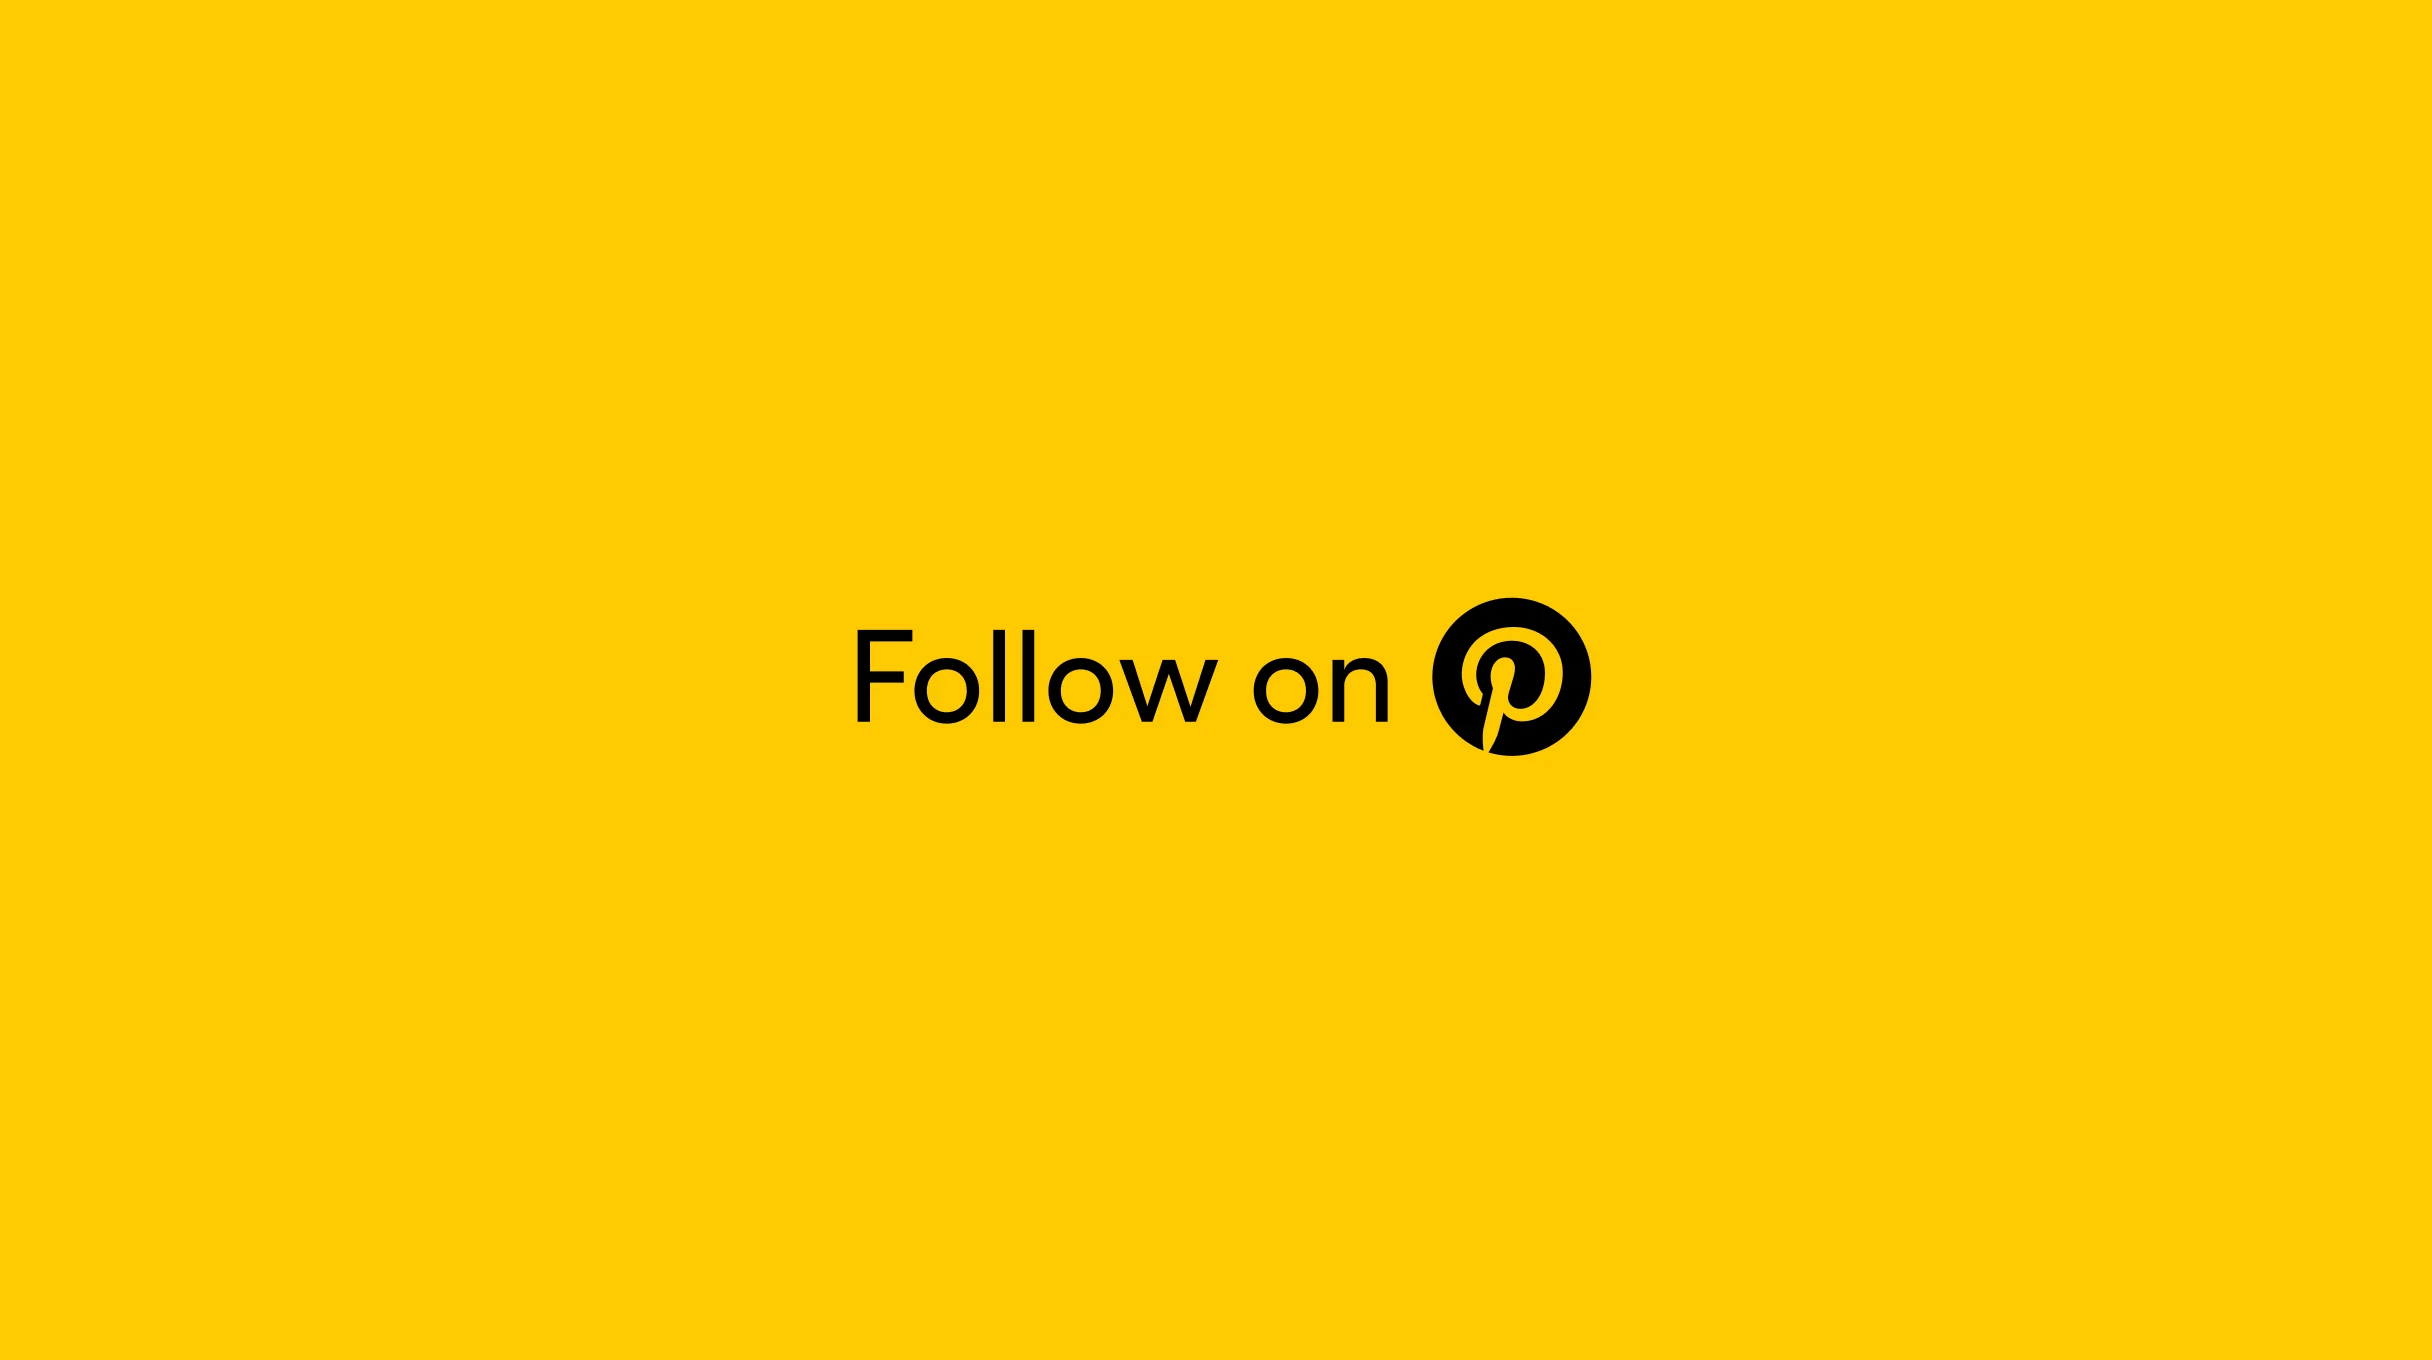 The words ‘Follow on’ and an orange Pinterest logo circled in black against an orange background